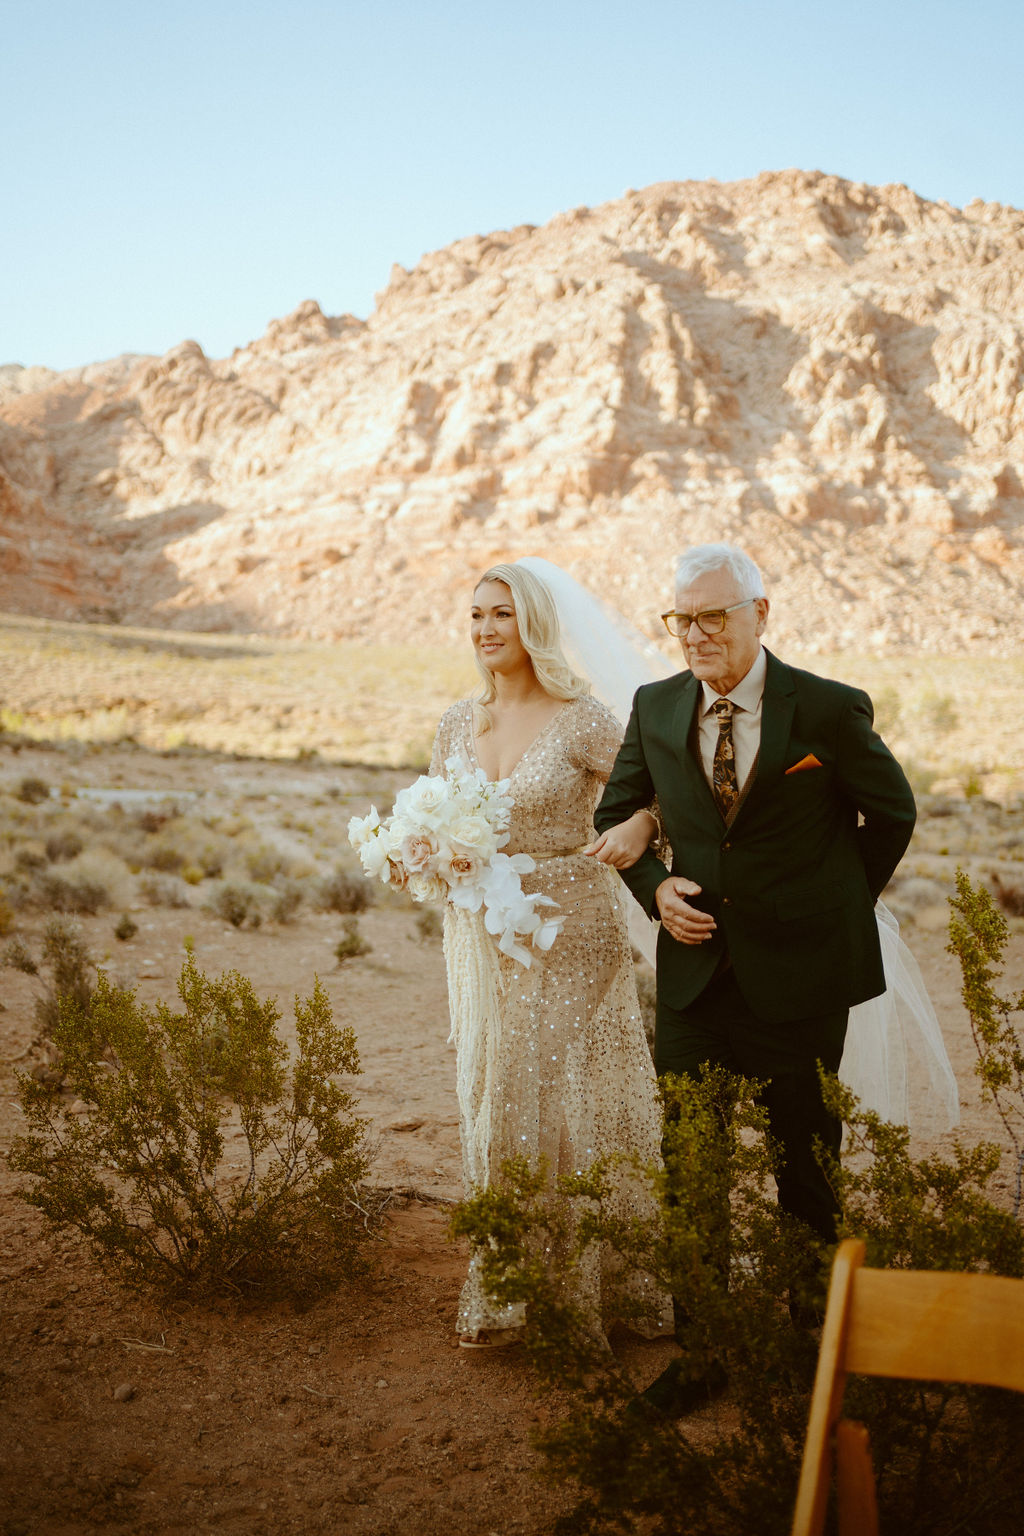 The bride accompanied by her father walking down the desert aisle. 